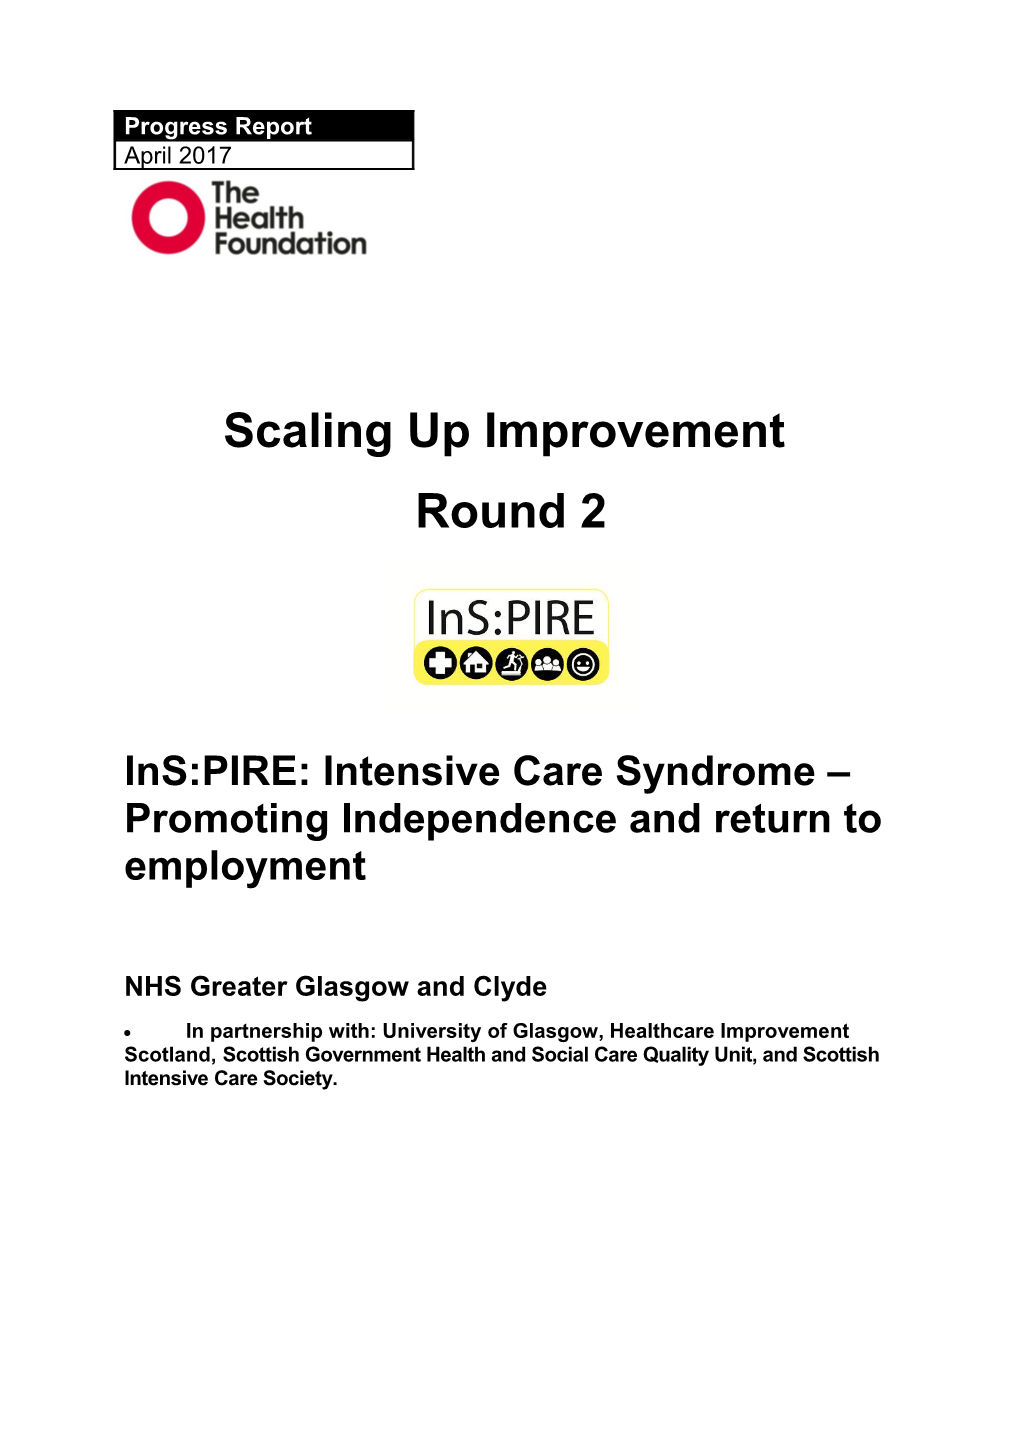 Ins:PIRE: Intensive Care Syndrome Promoting Independence and Return to Employment